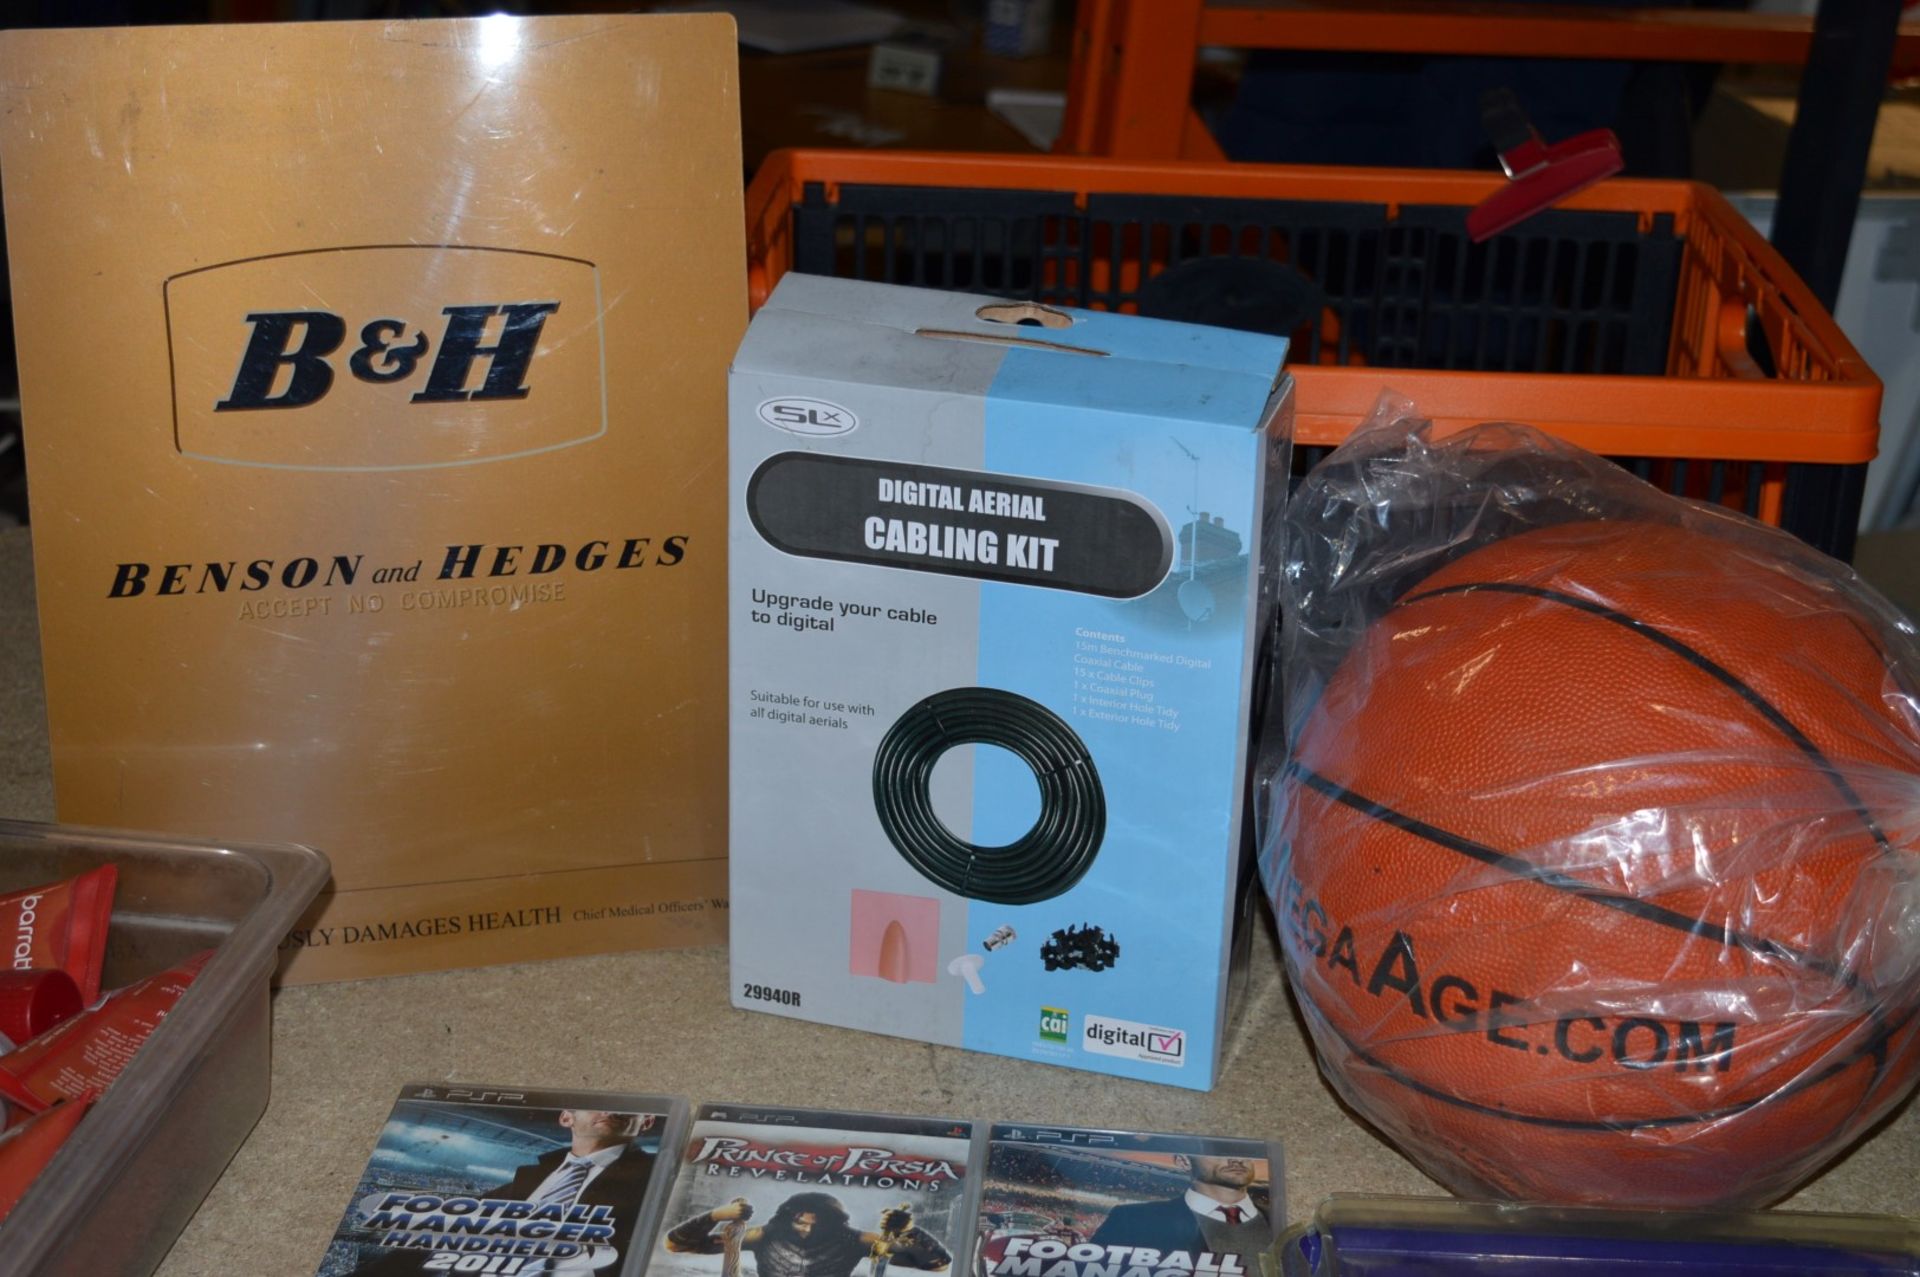 1 x Assortment of Items Including Digital Aerial Cabling Kit, Basketball, HP Printer Cartridges, - Image 2 of 10